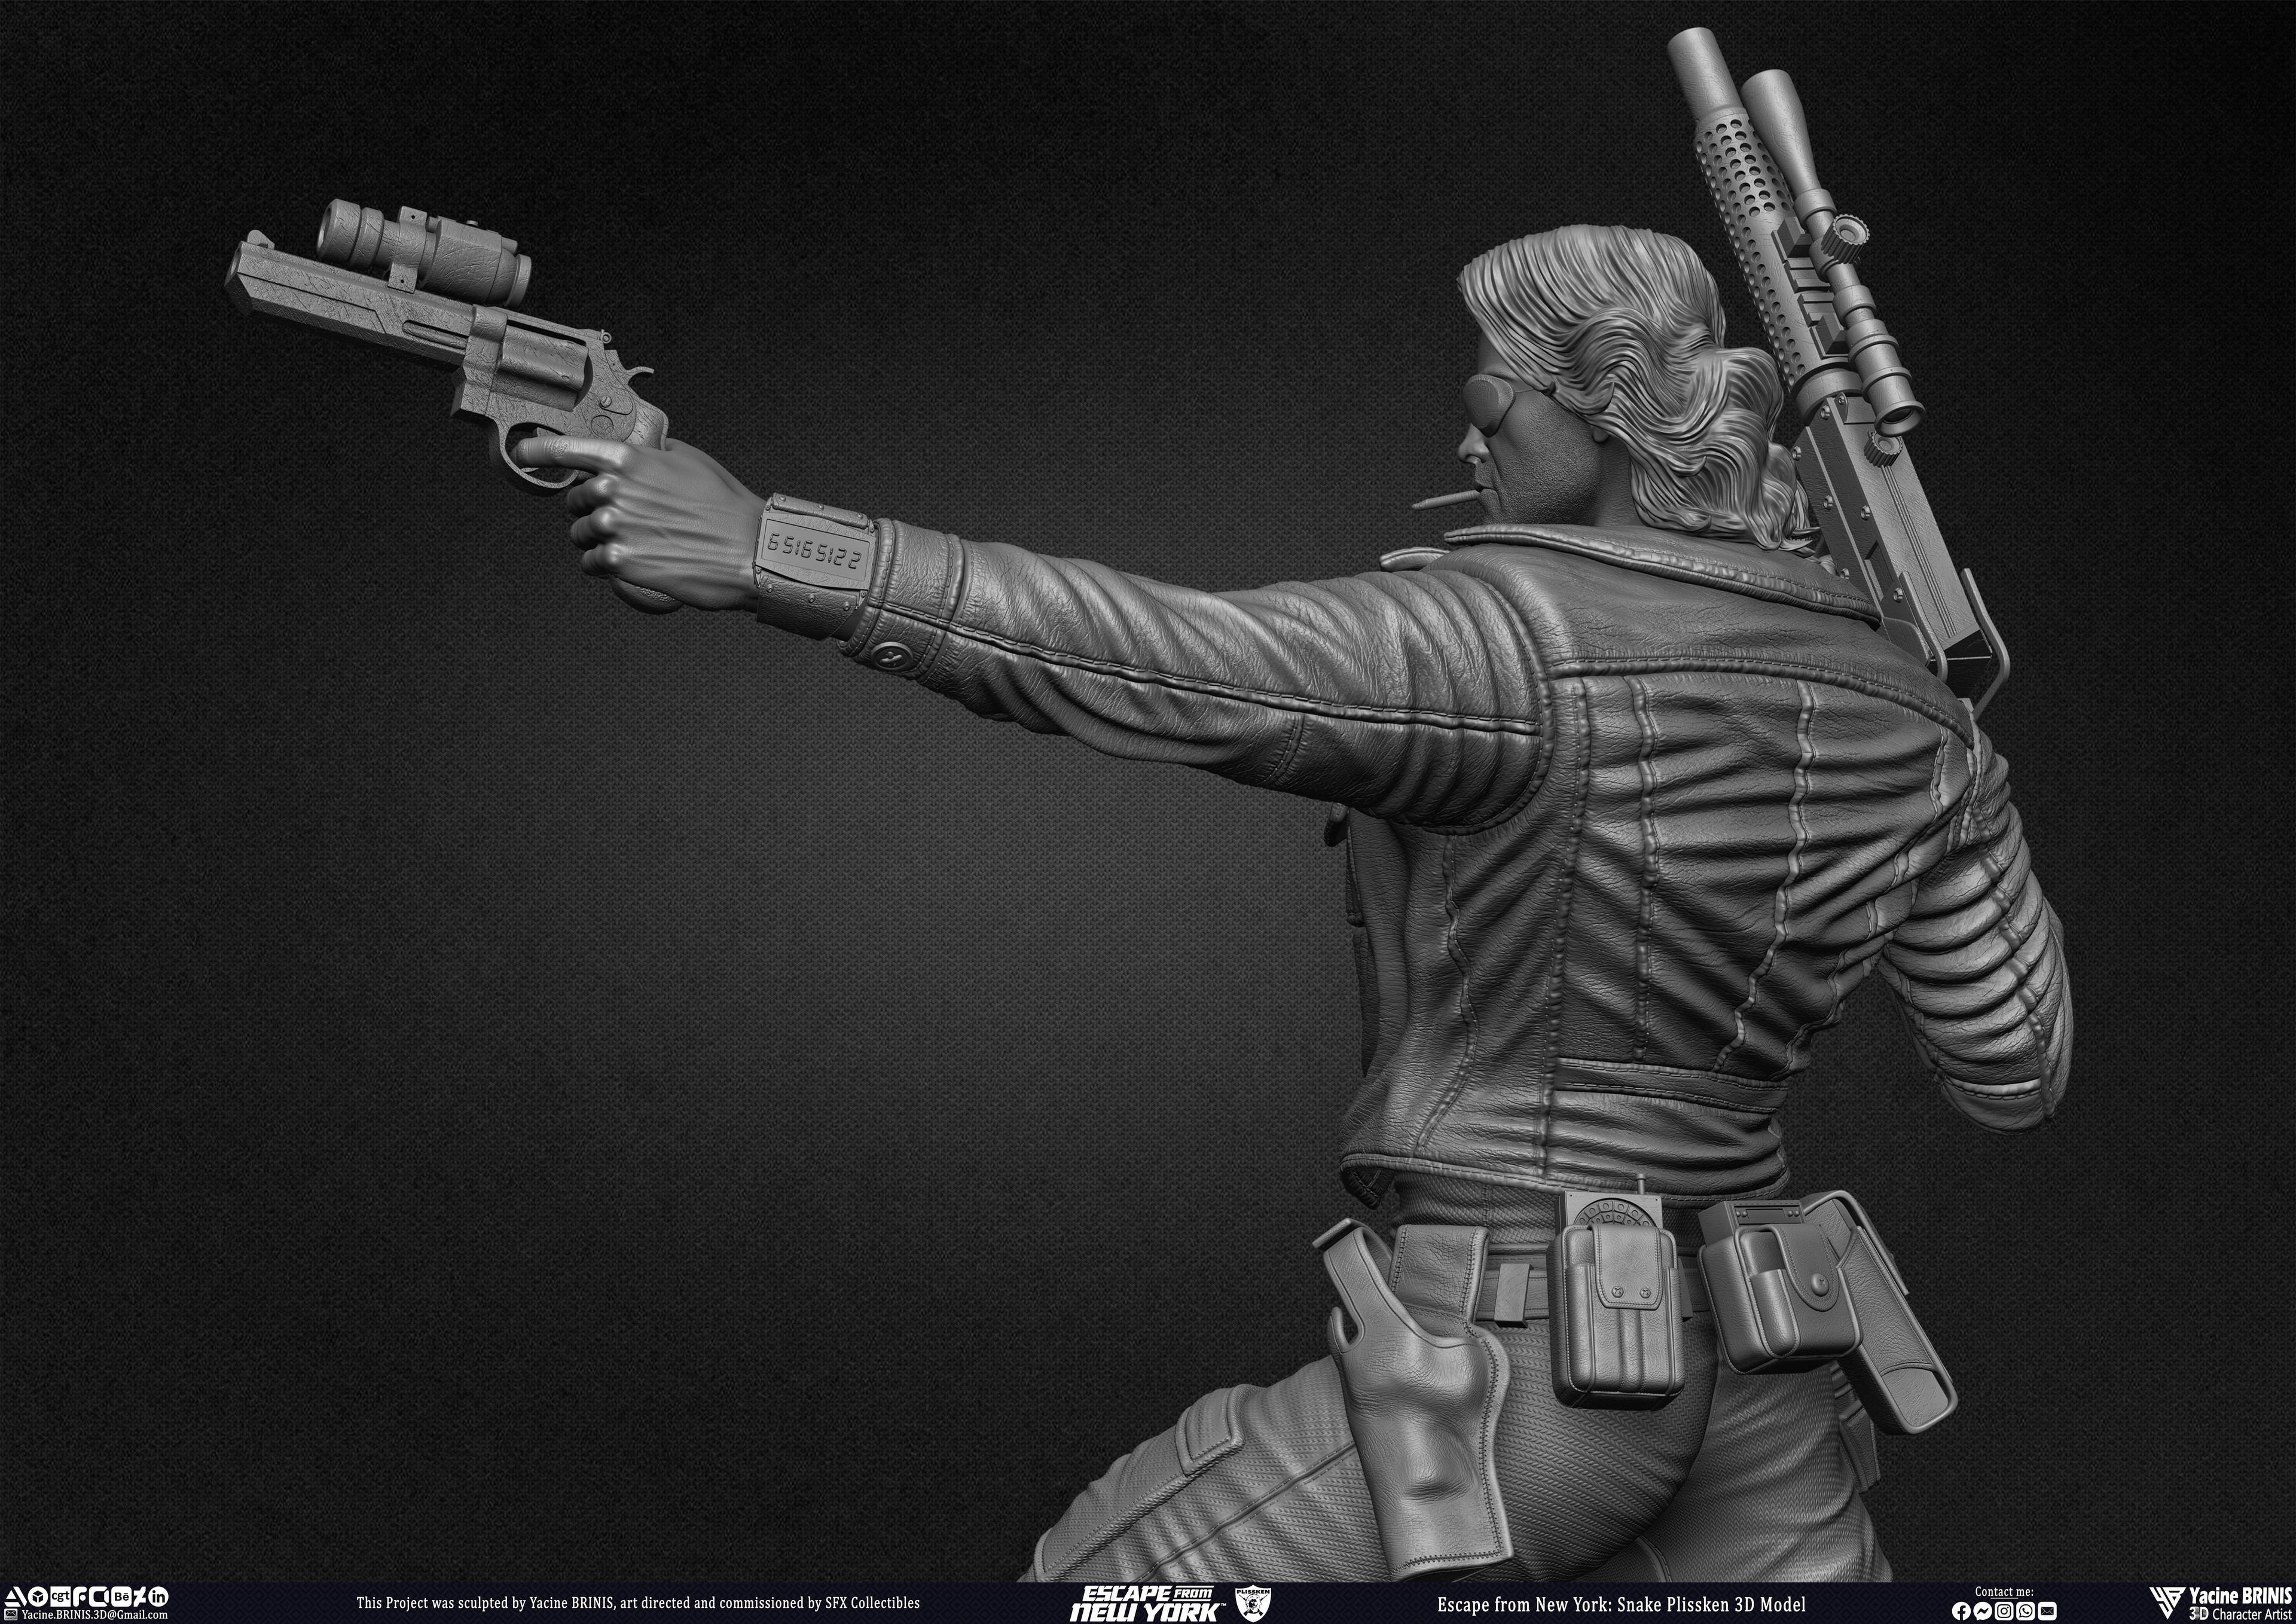 Escape from New York Snake Plissken sculpted by Yacine BRINIS 030